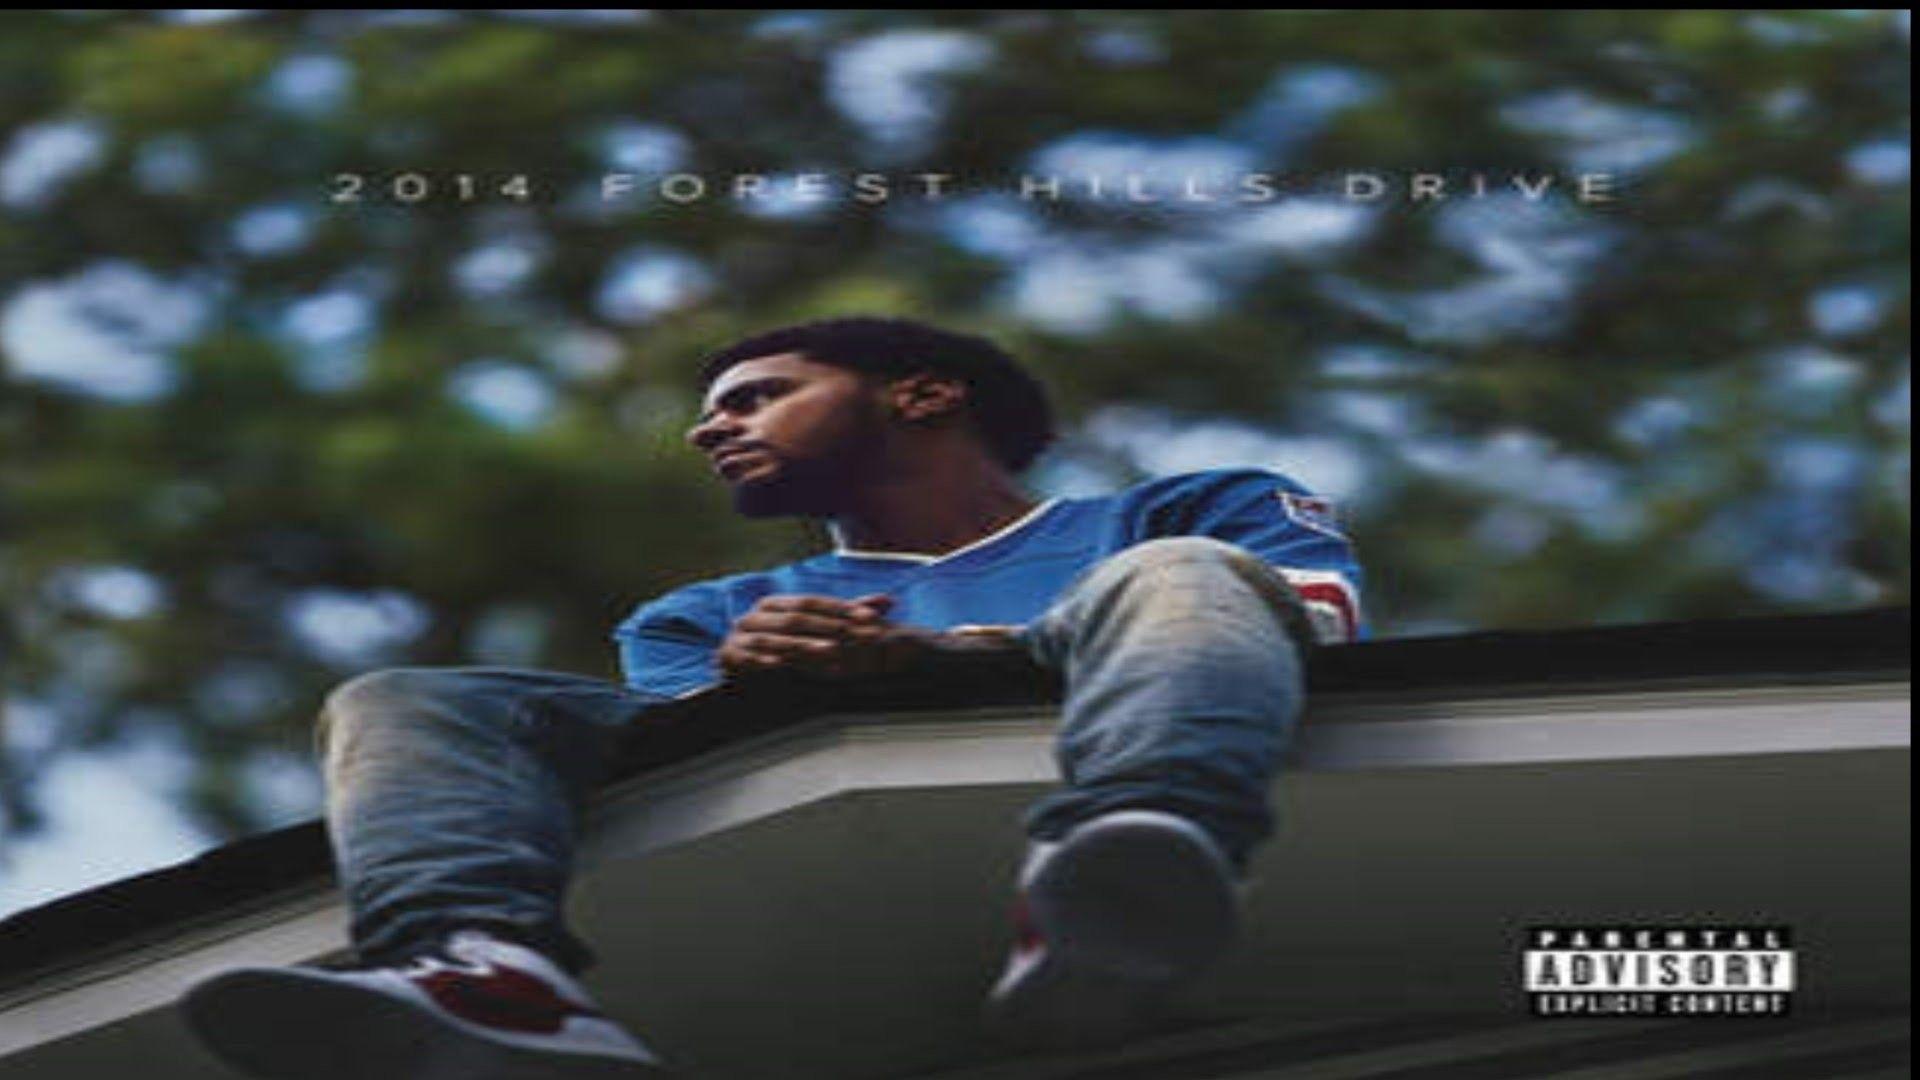 2014 forest hills drive live album cover